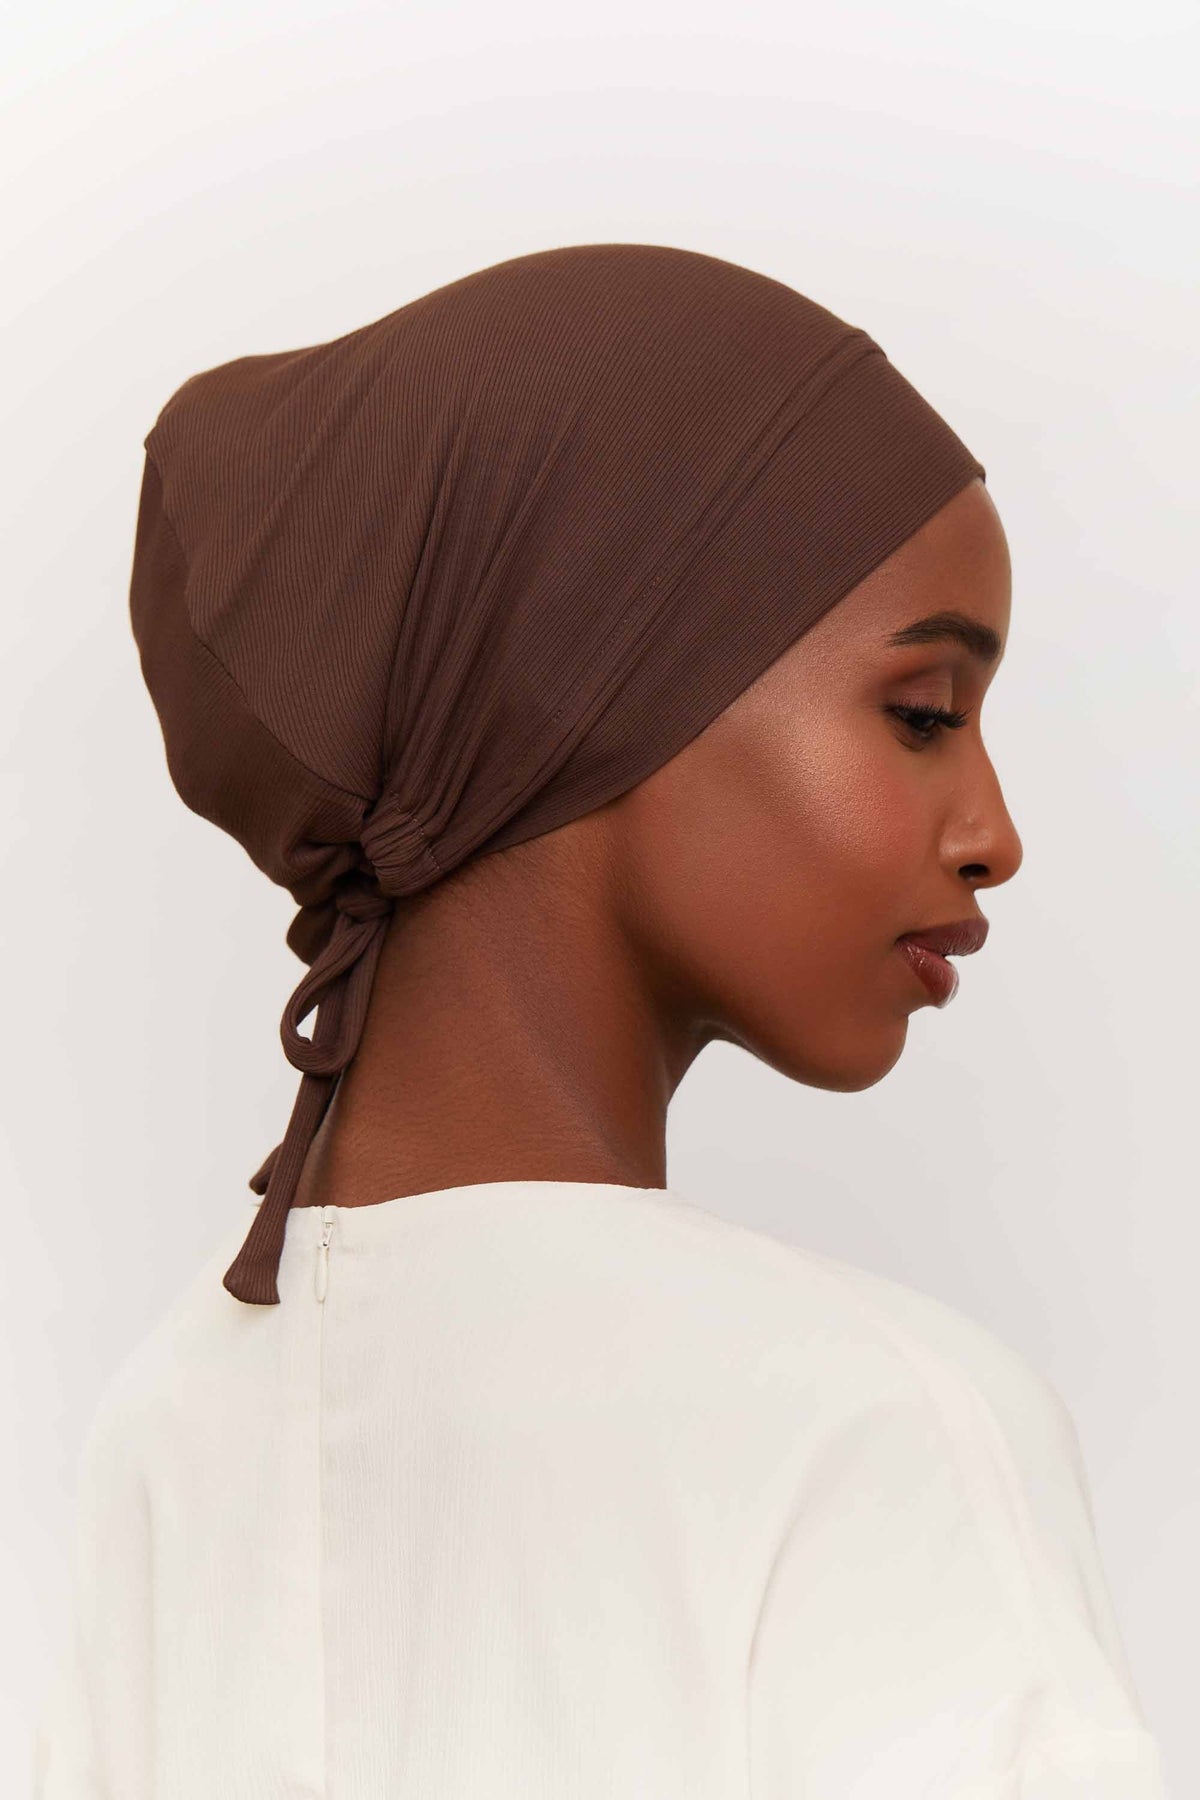 Ribbed Tie Back Undercap - Java Extra Small Accessories Veiled 